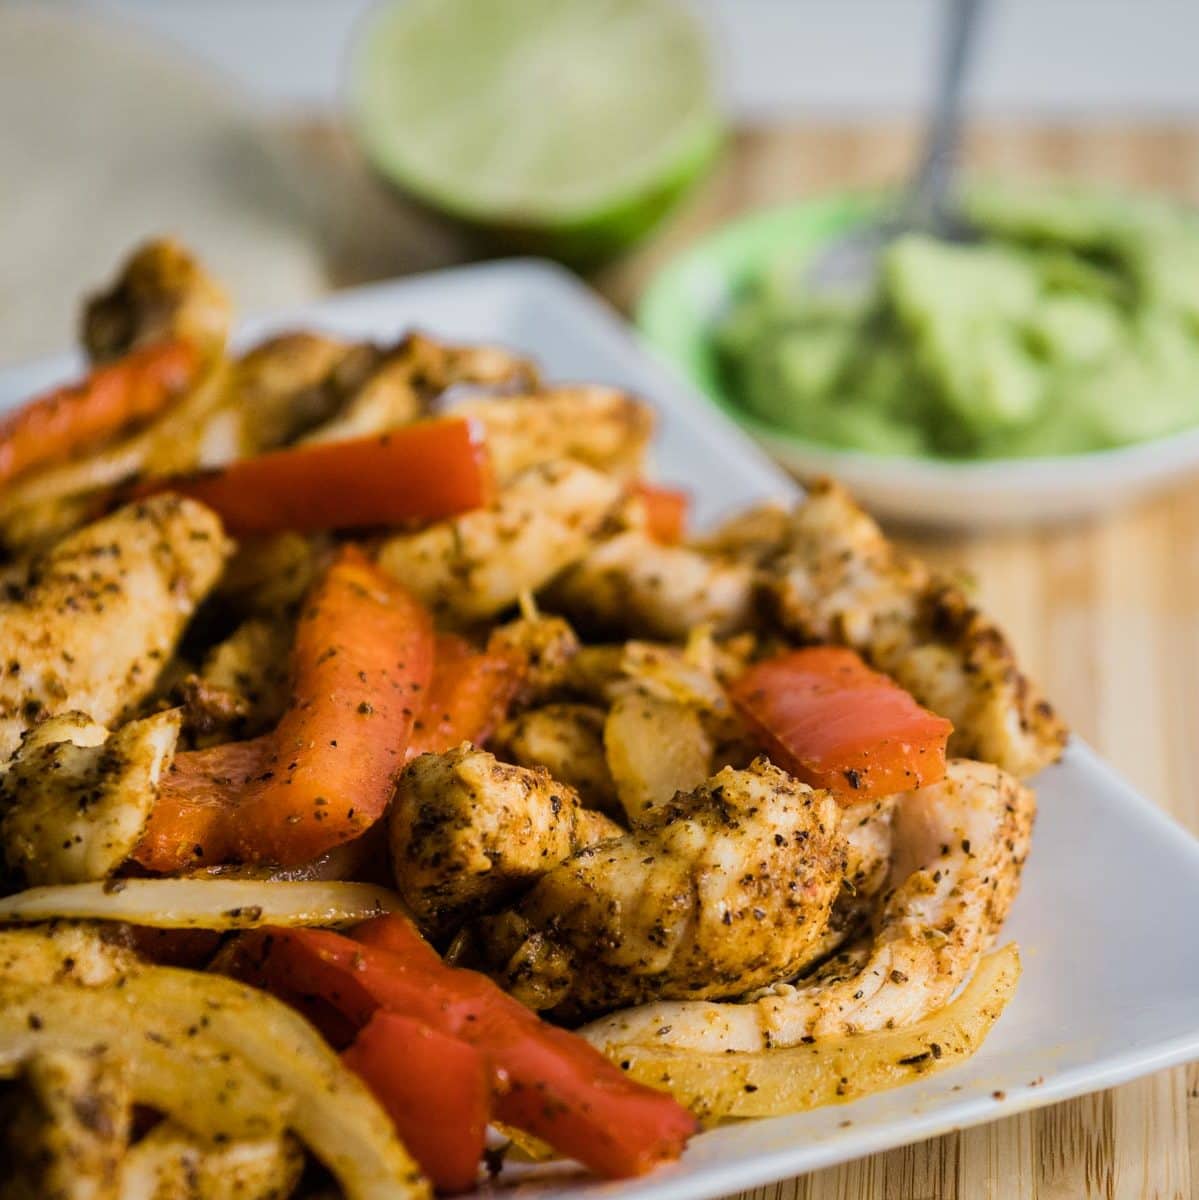 Plate of chicken fajitas with chicken, red bell peppers and onion.